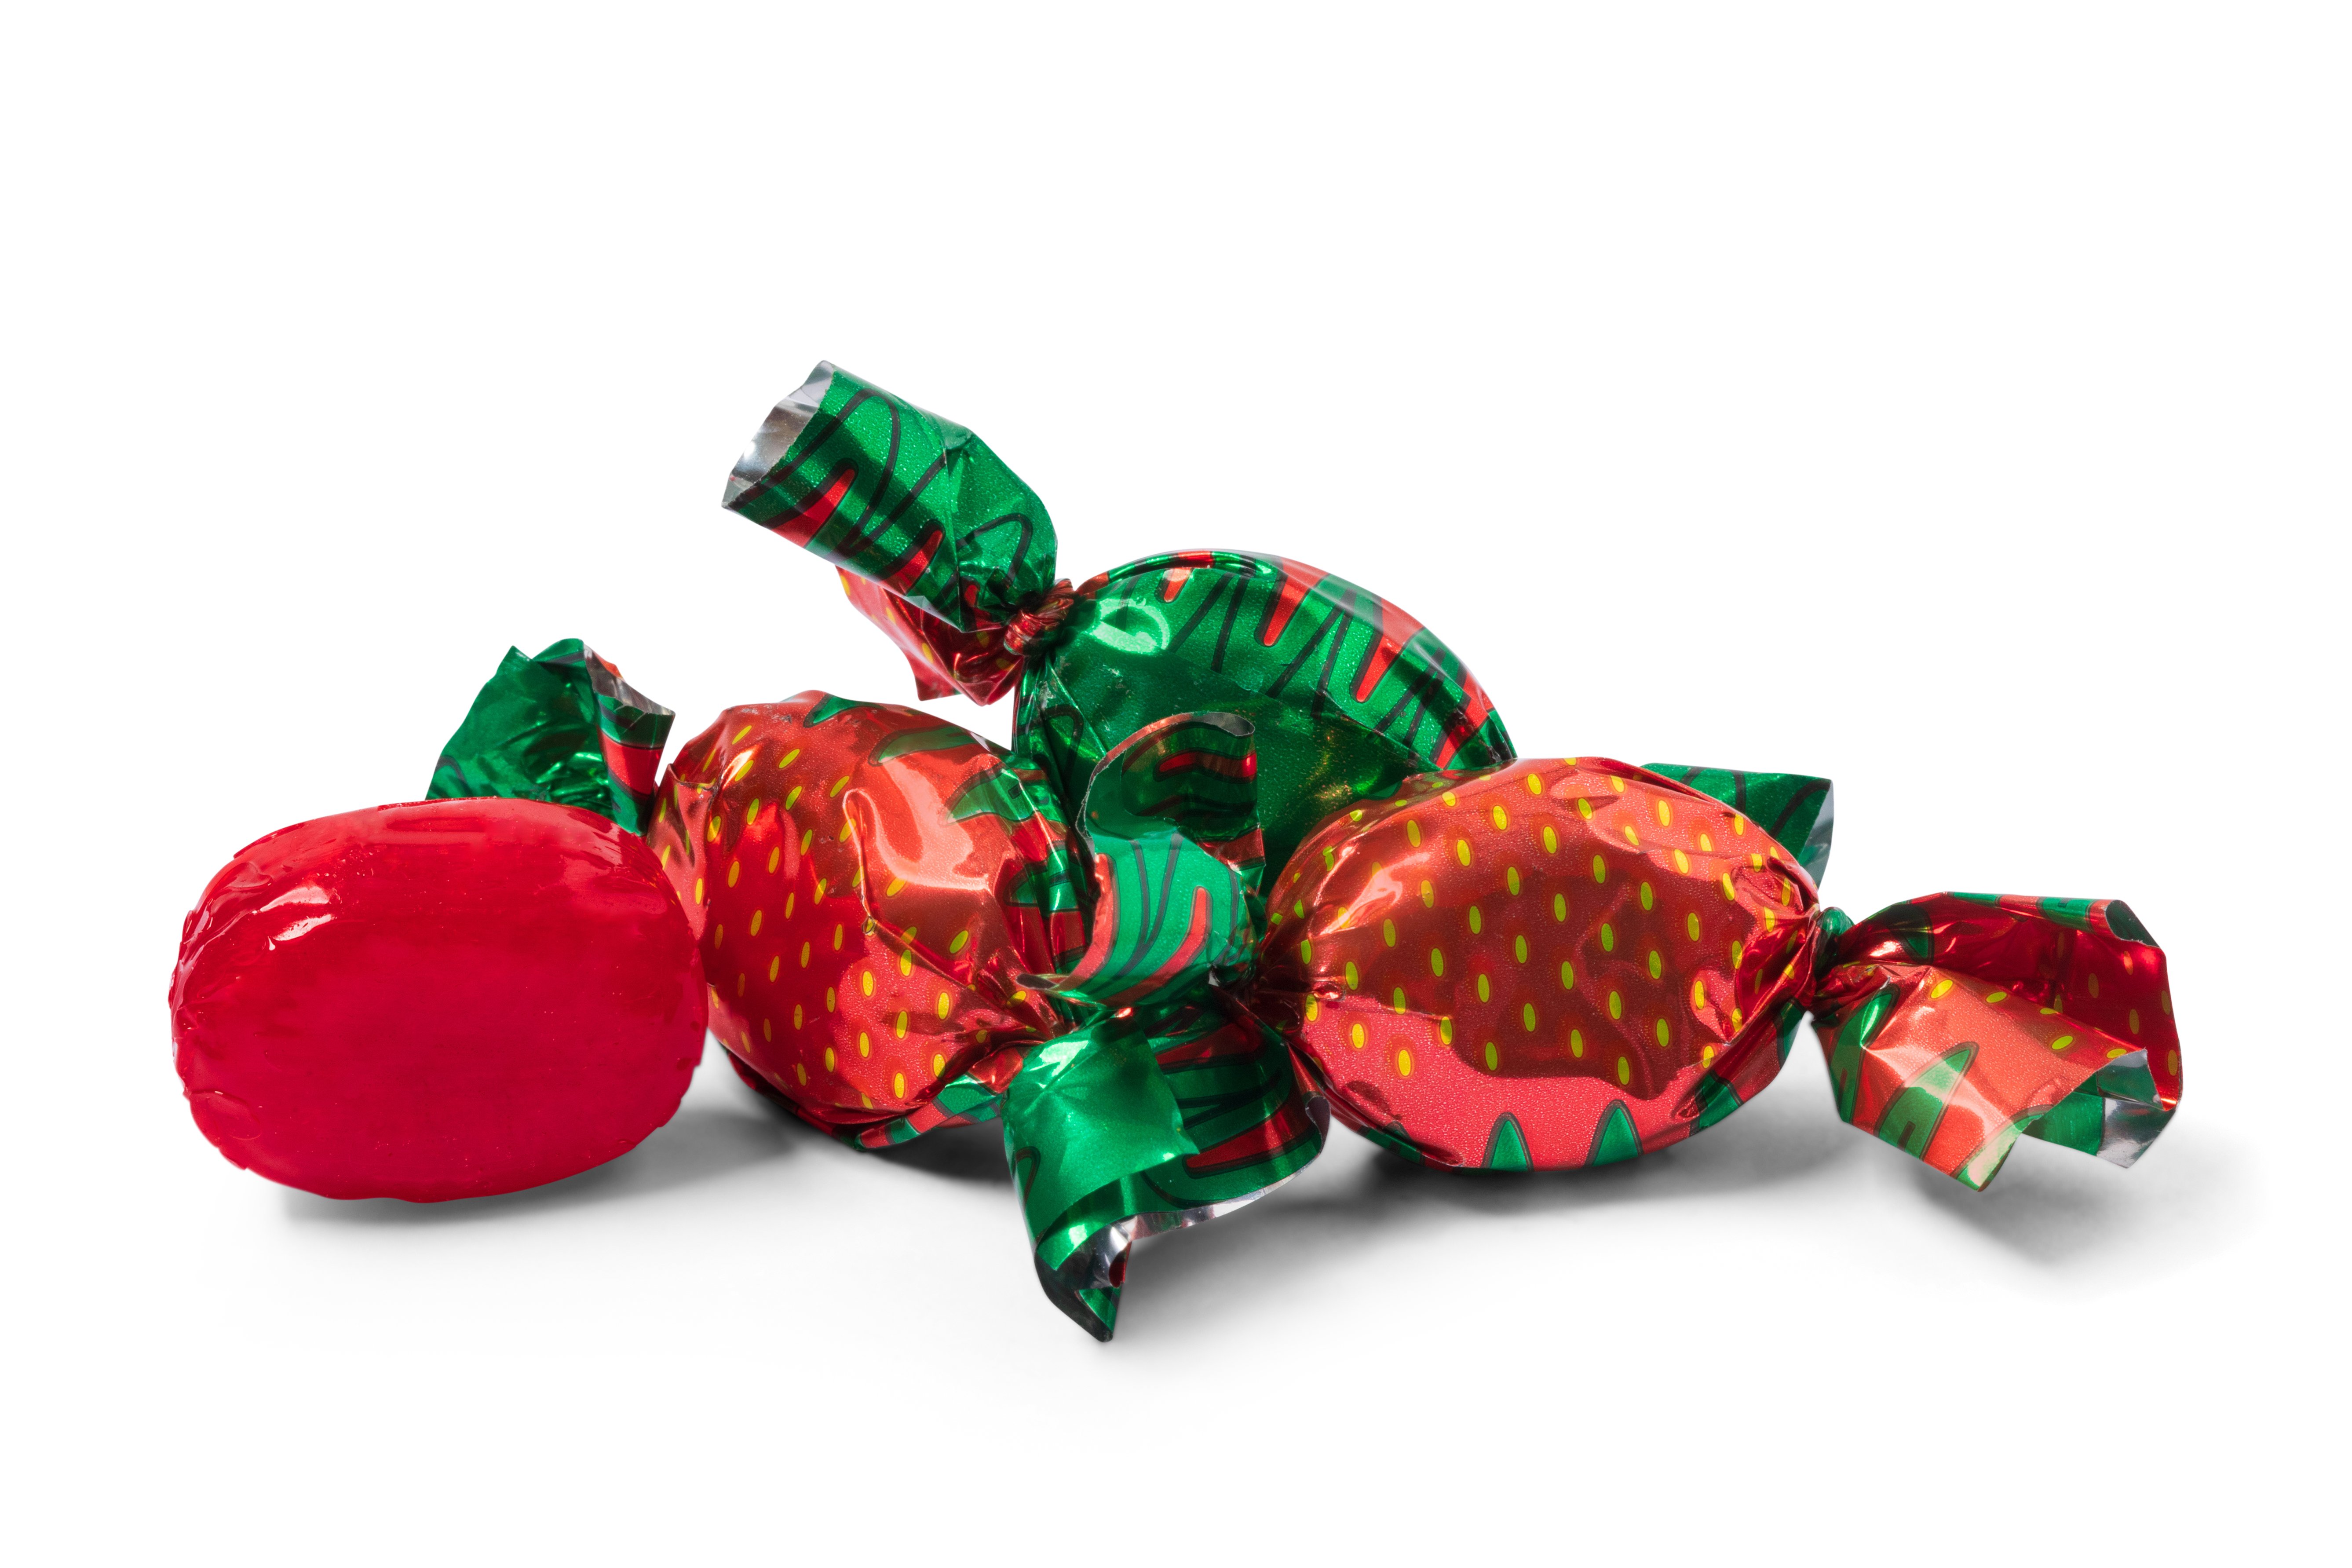 Strawberry-Filled Candy - True Treats Historic Candy